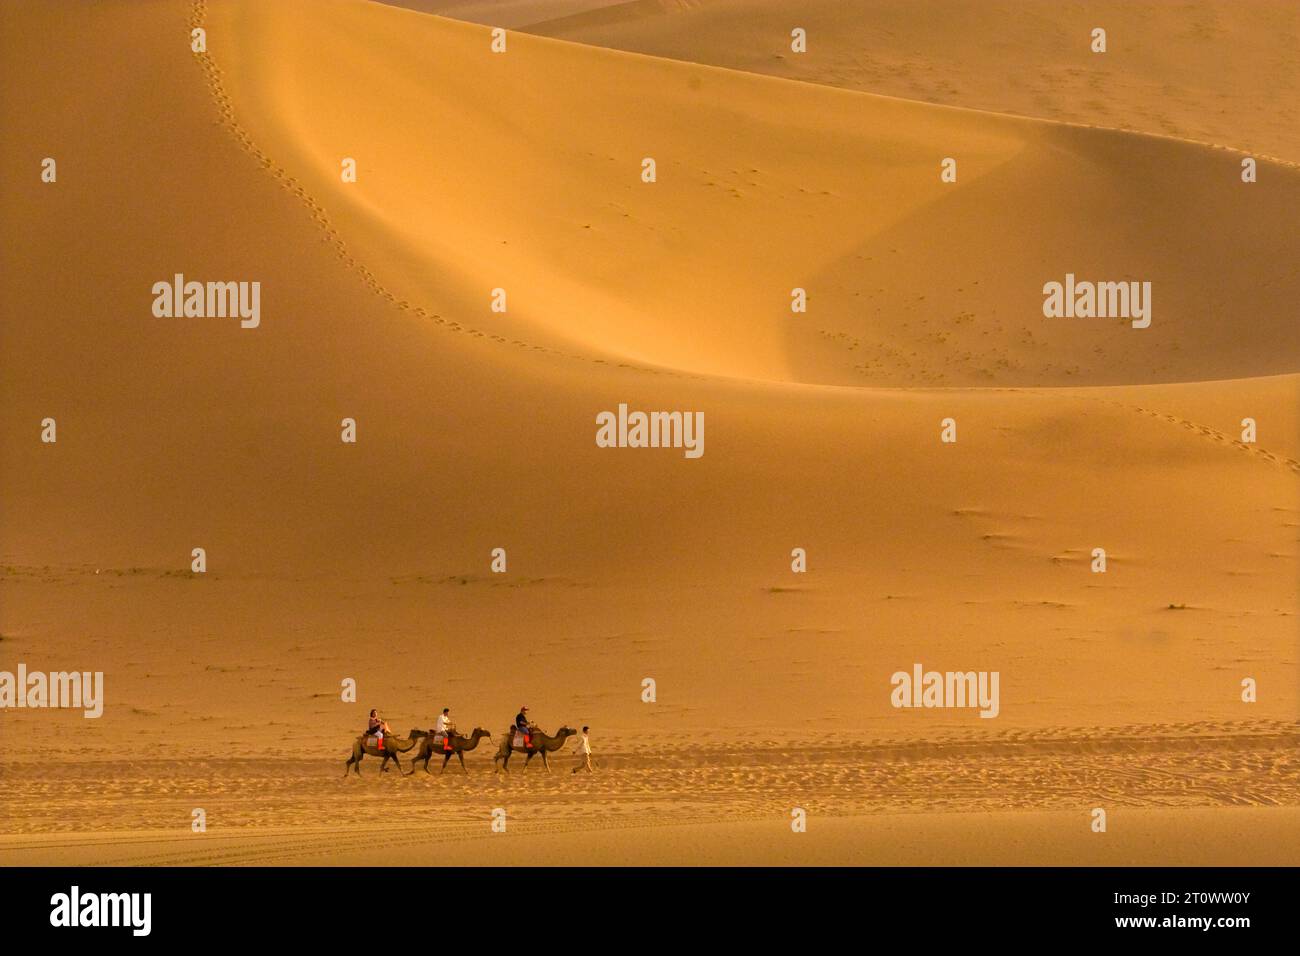 Late evening in the sand dunes near Dunhuang, Gansu province, China Stock Photo